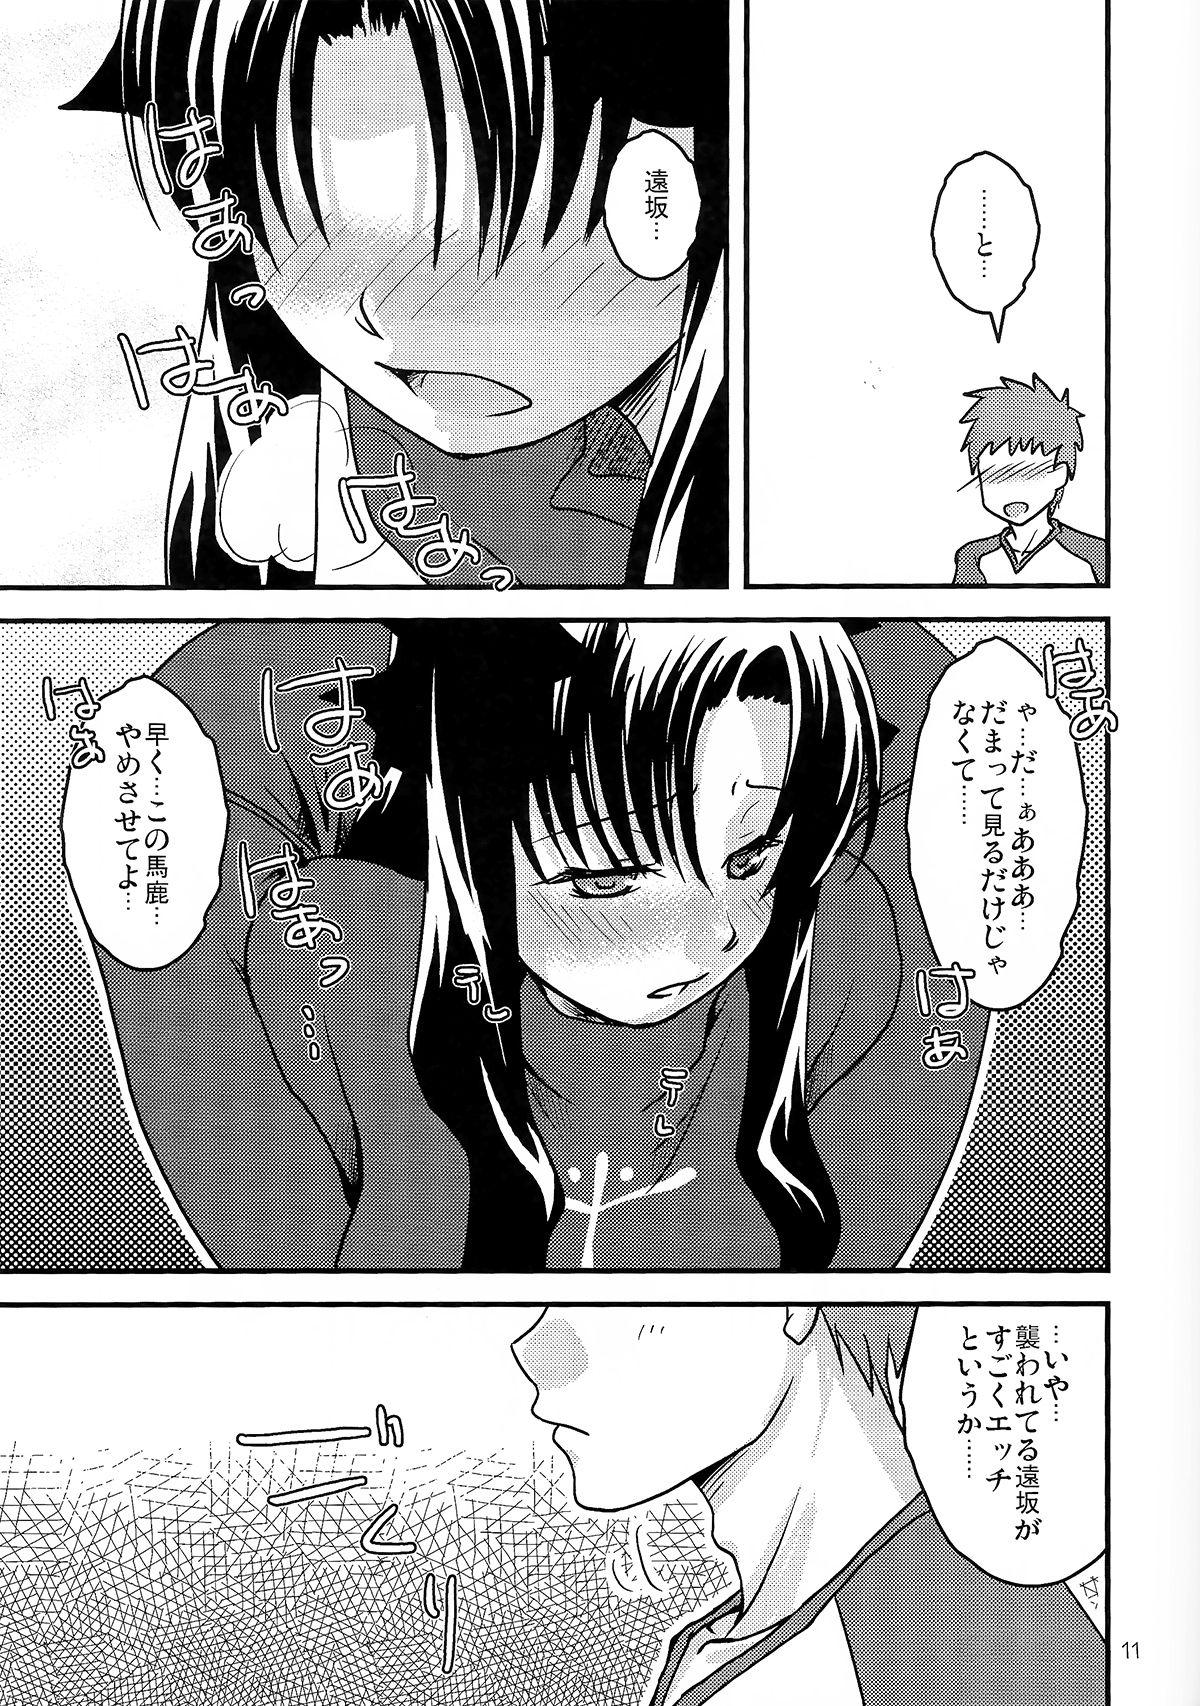 Massive Fakers - Fate stay night Glam - Page 10